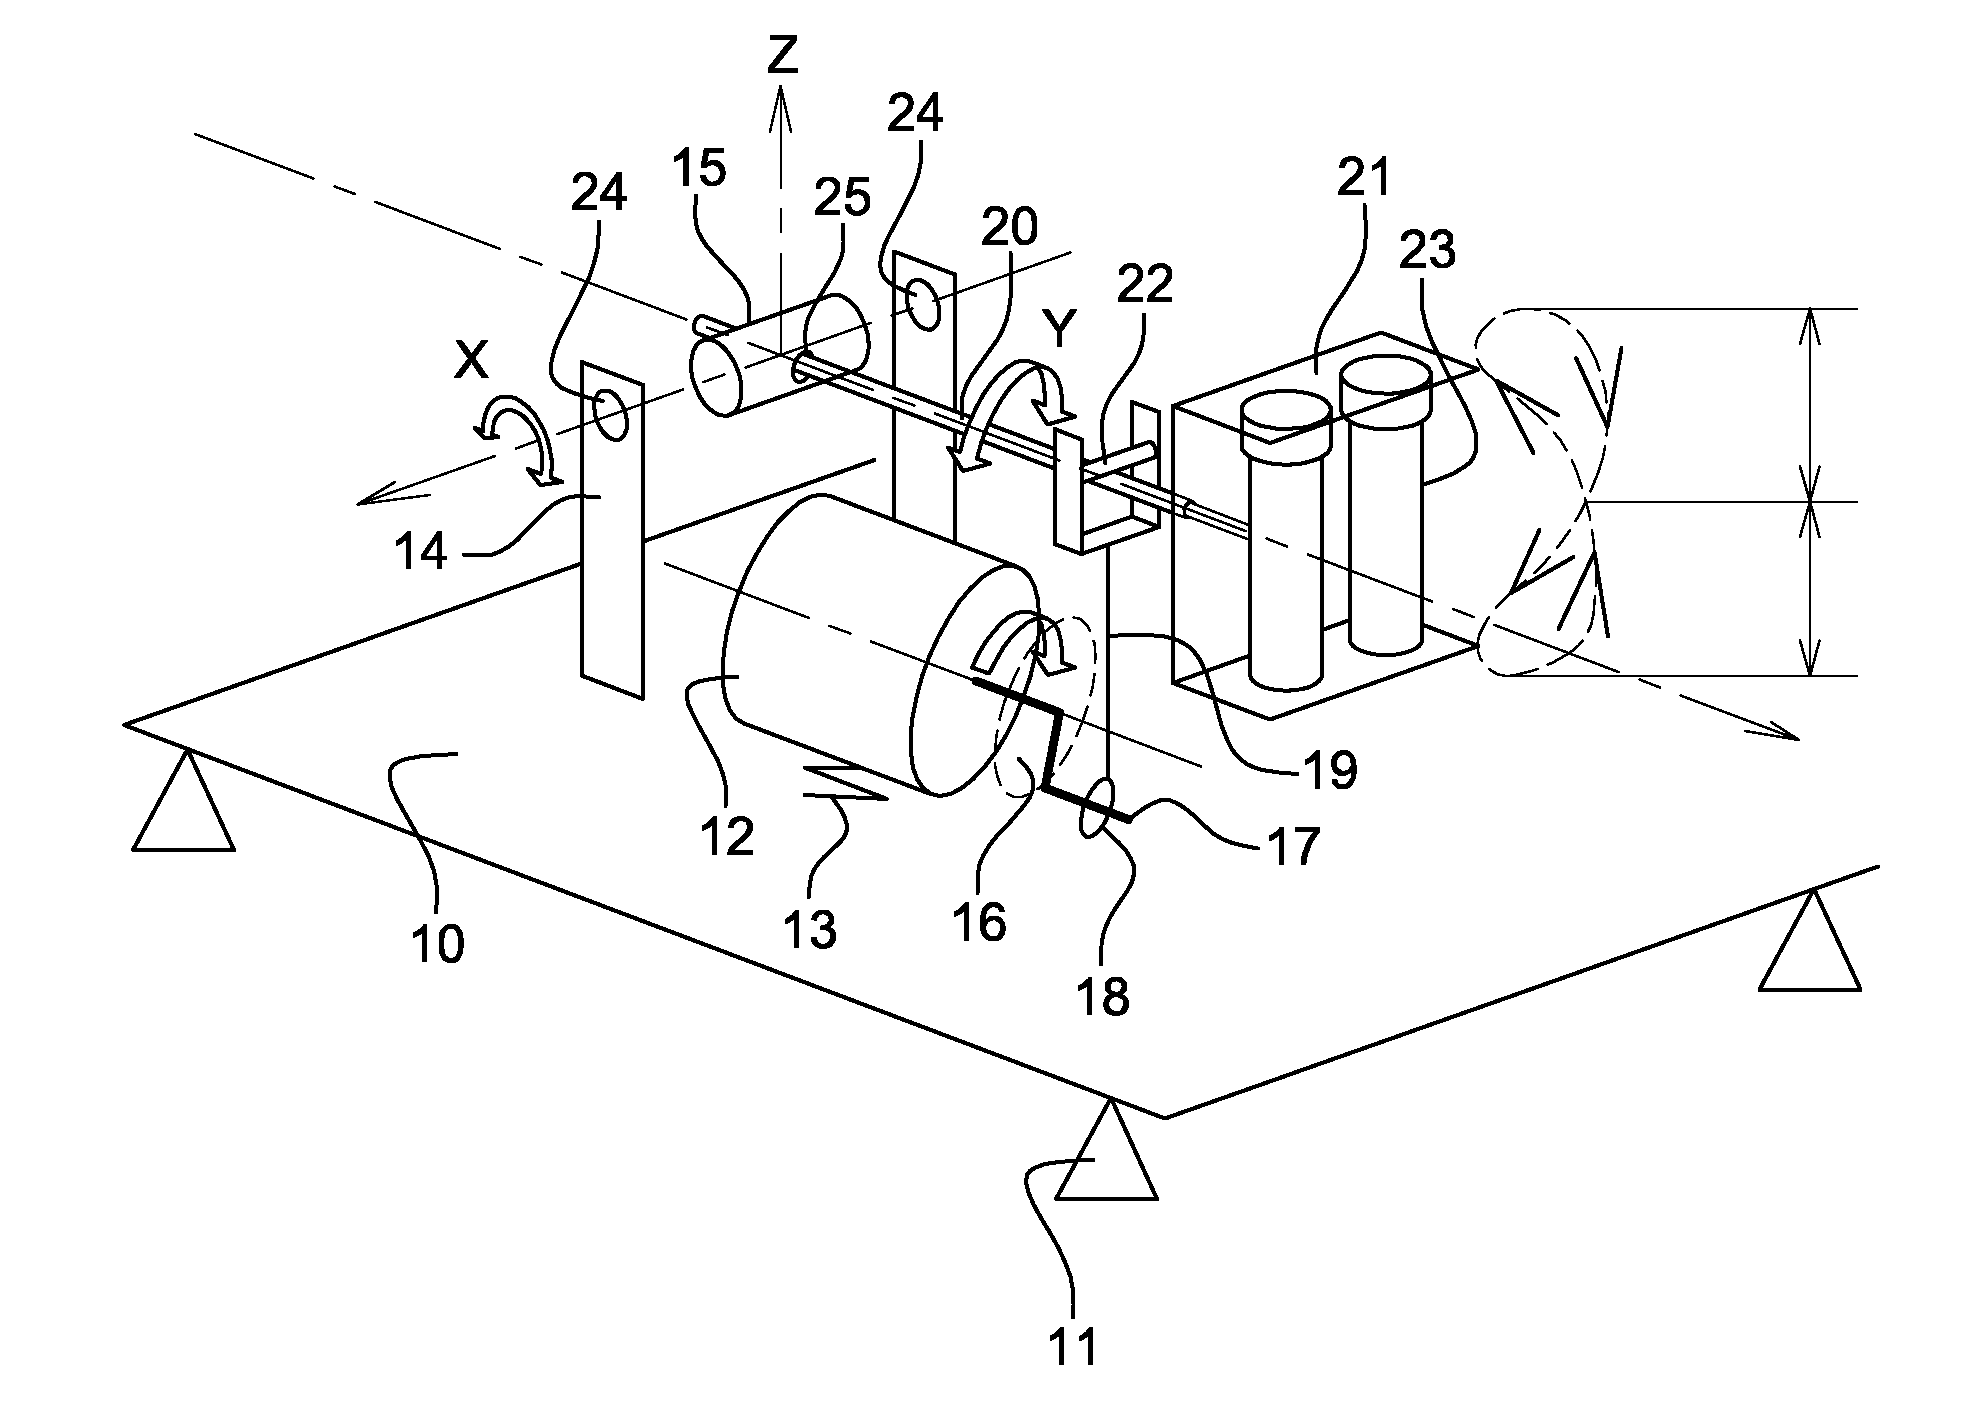 Device for the quick vibration of tubes containing, in particular, biological samples